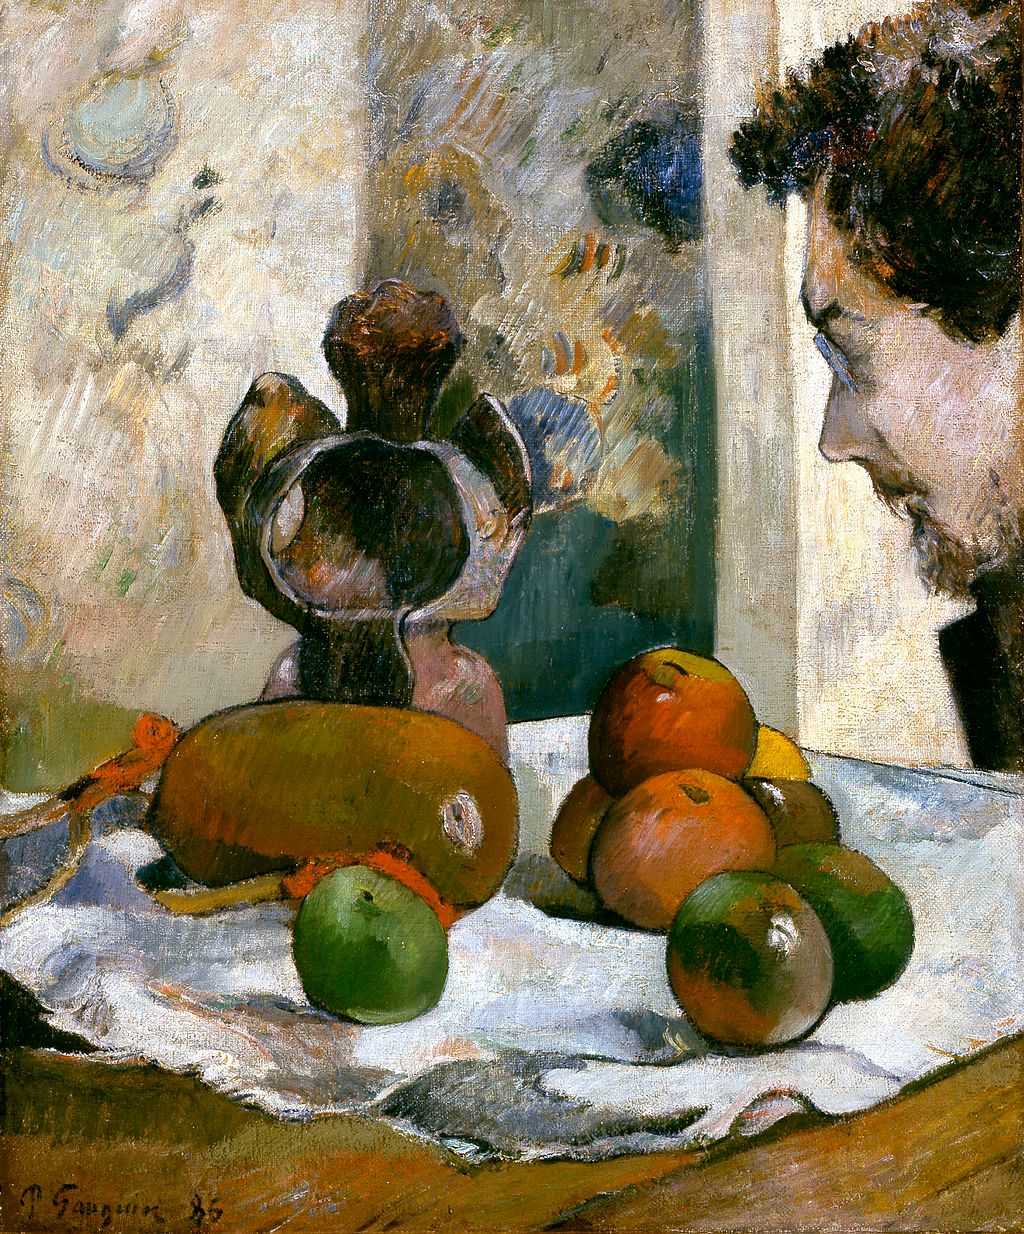 “Doing a Gauguin’’ means starting something completely new, making a dramatic change in one’s career